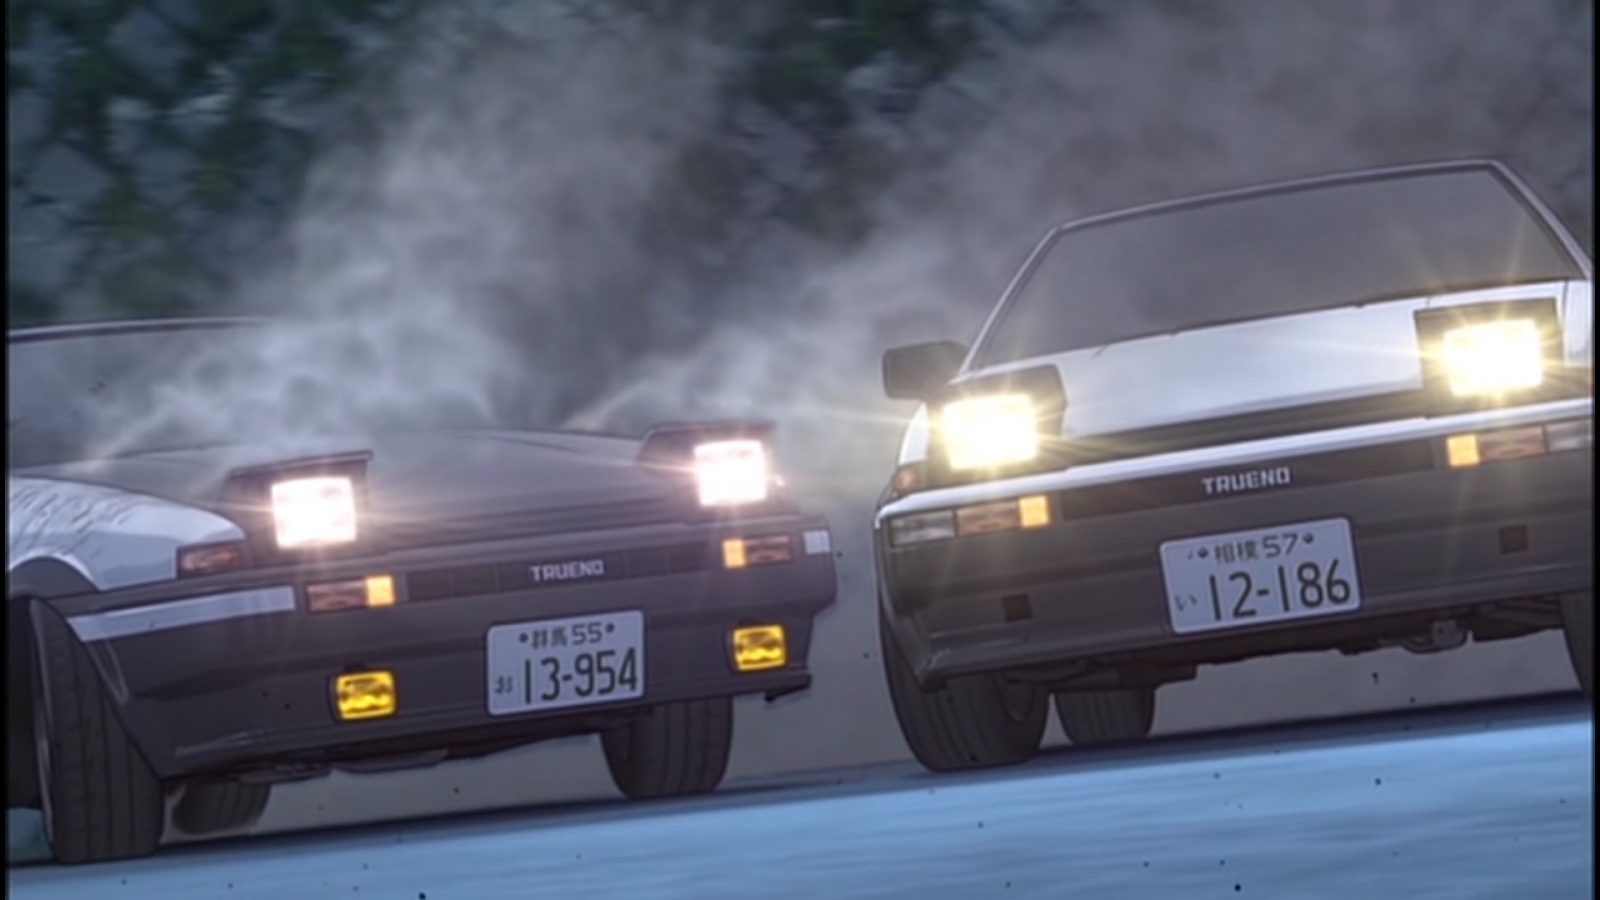 NEWS: After 18 years of touge battles, this is how Initial D ends